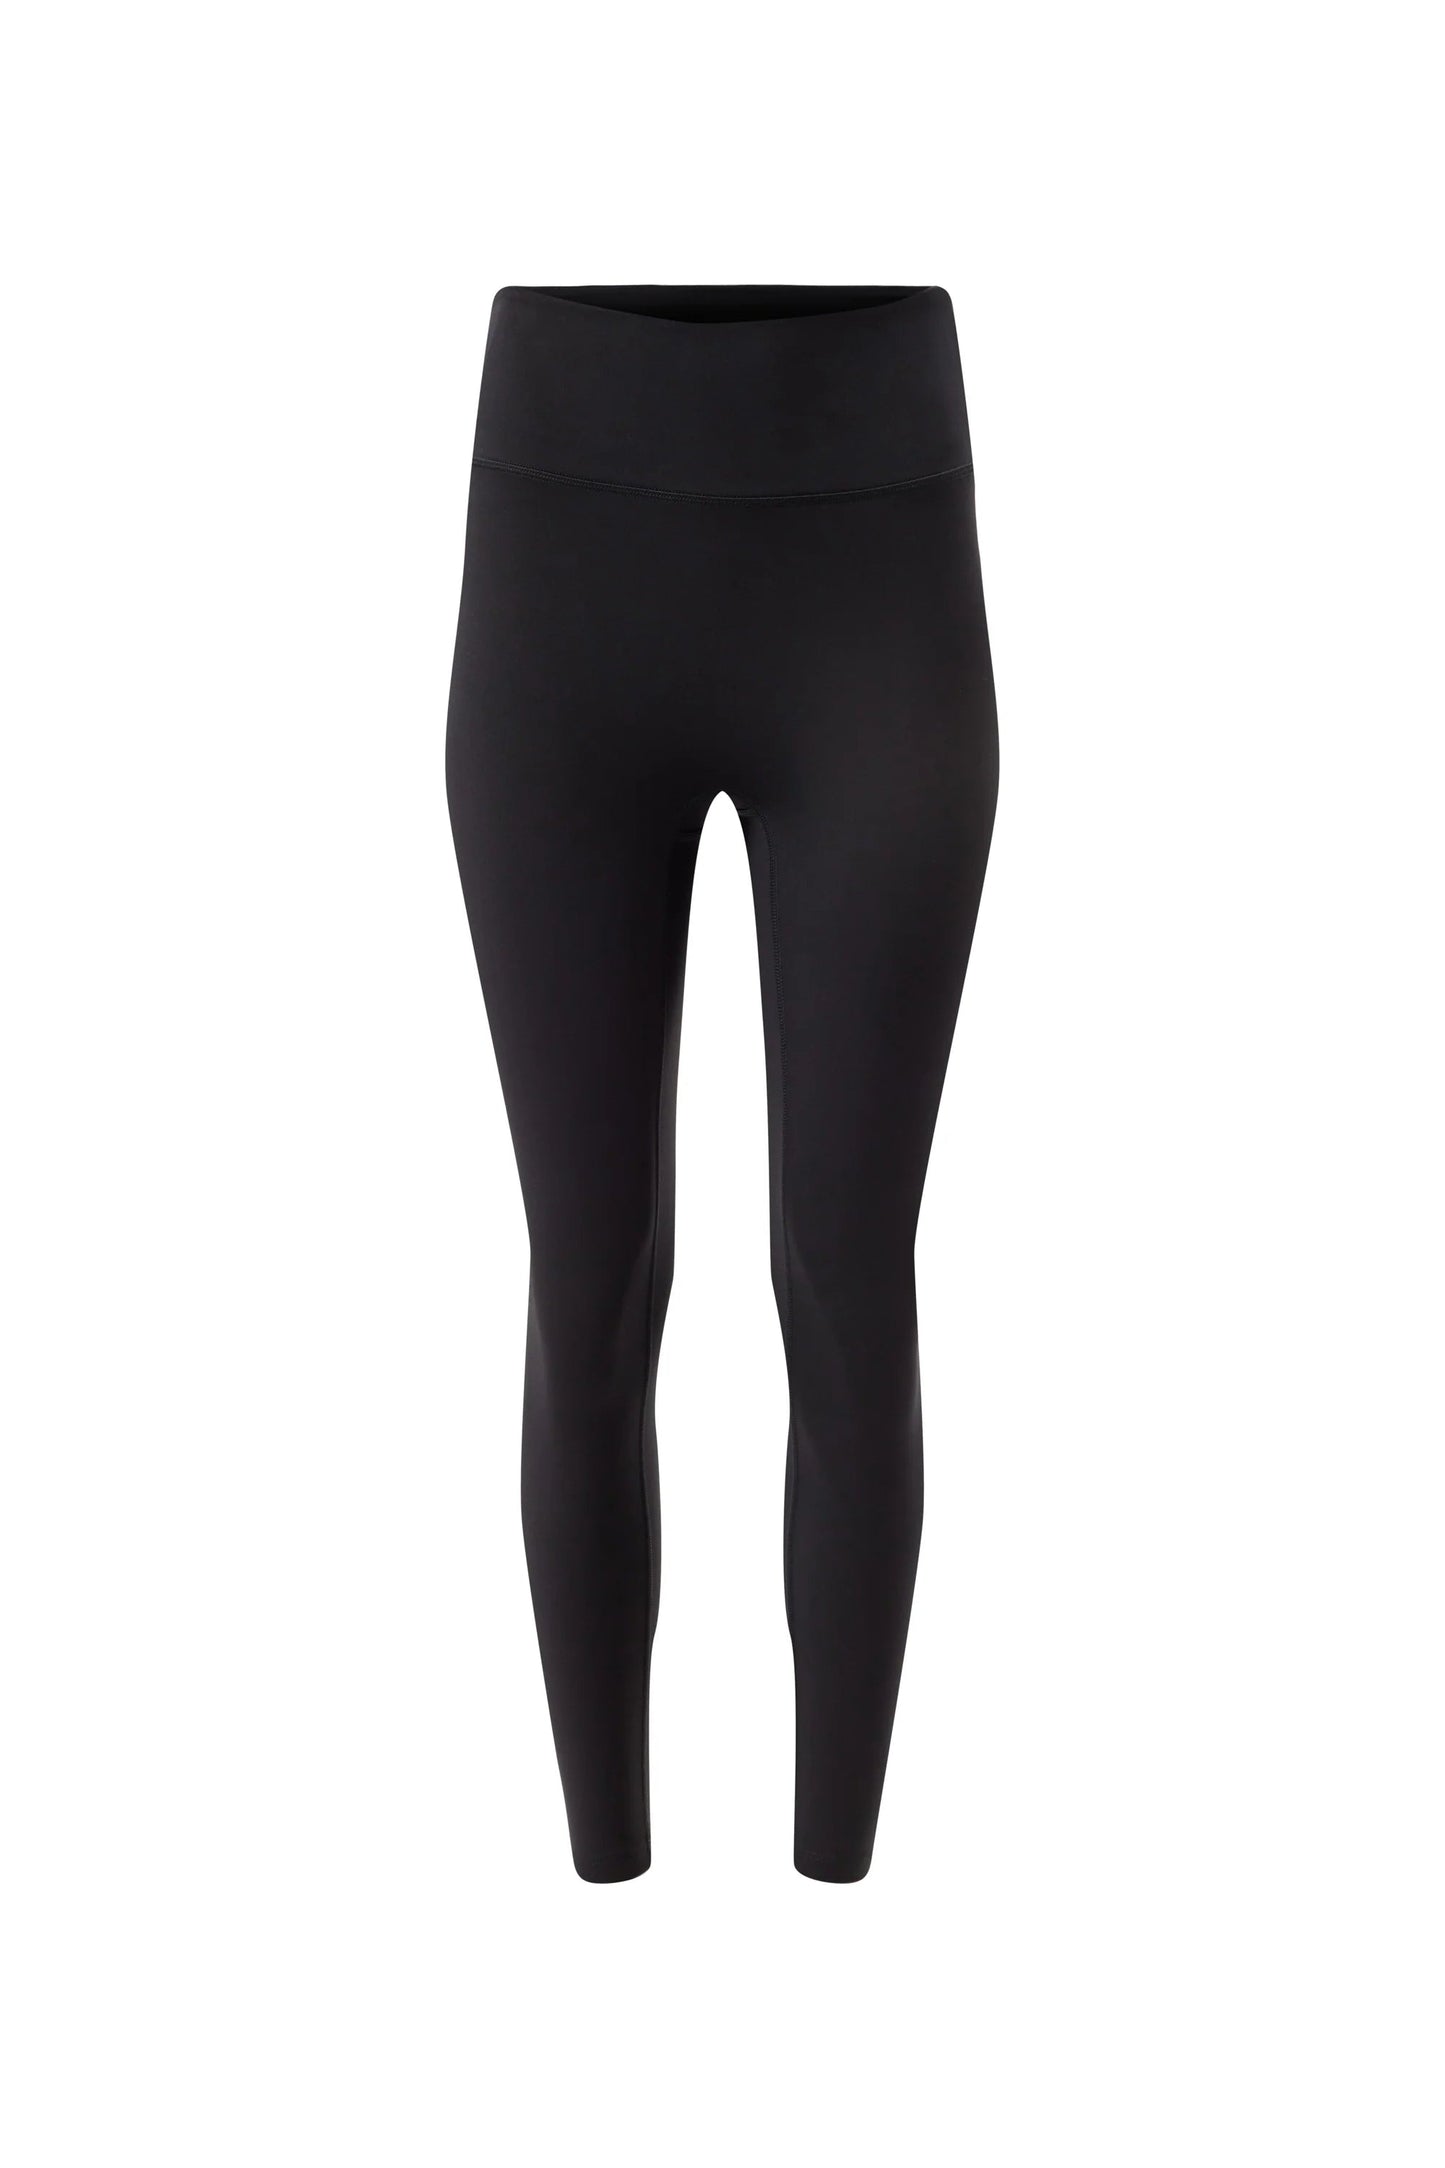 Products Luxe Leggings - 23.5"